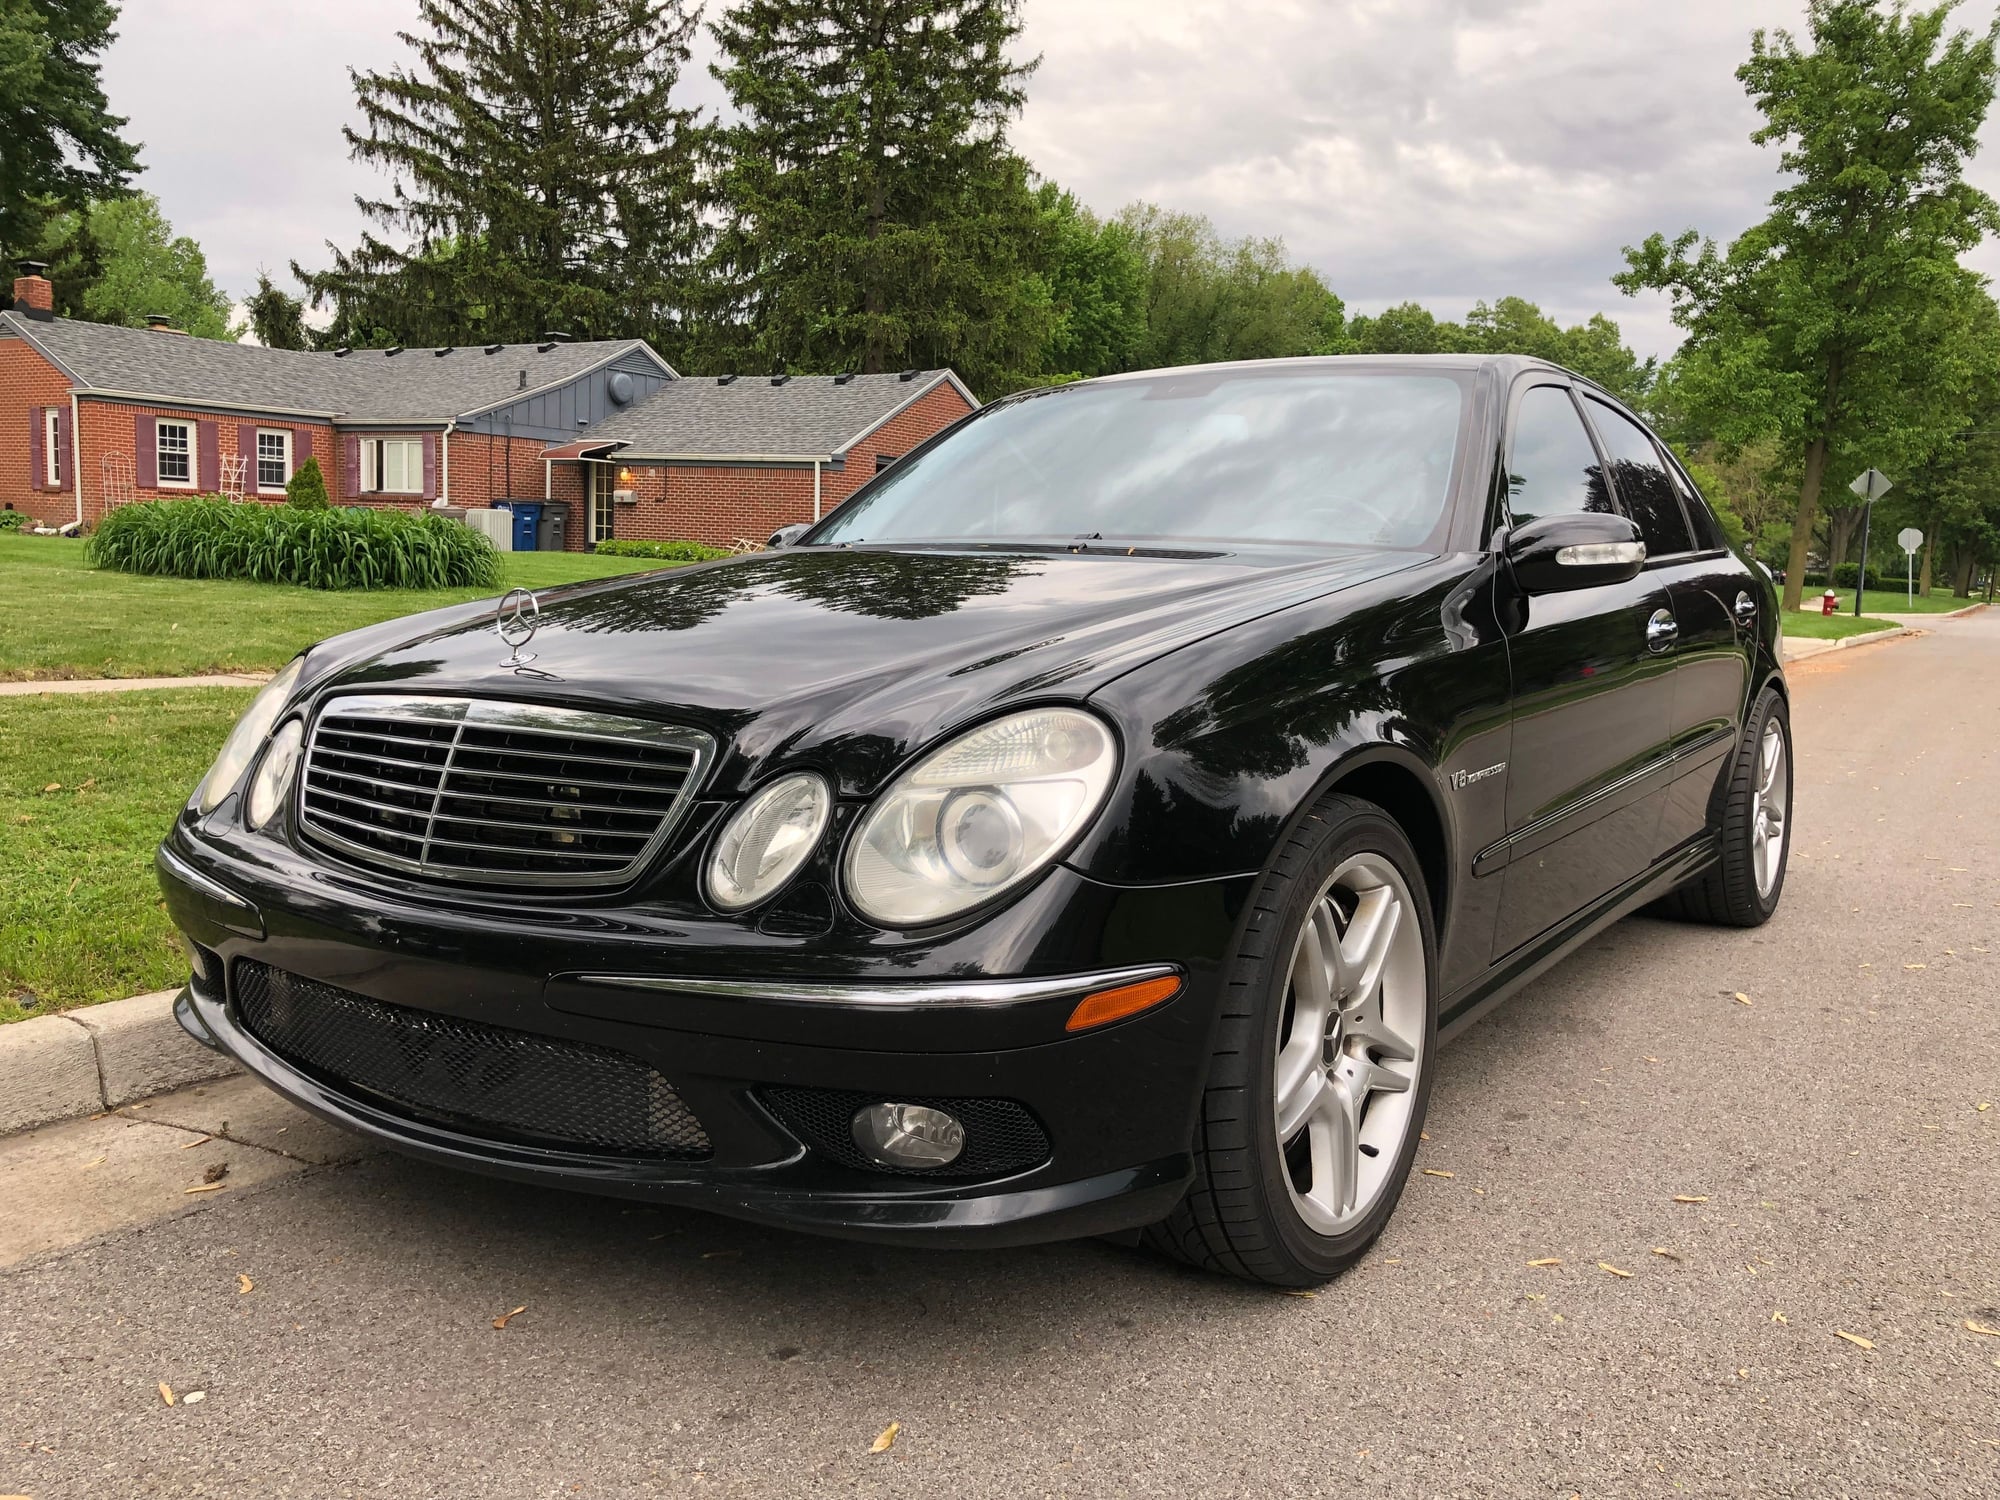 2004 Mercedes-Benz E55 AMG - 04' E55 NEED GONE ASAP!!! - Used - VIN WDBUF76J24A541445 - 8 cyl - 2WD - Automatic - Sedan - Black - Toledo, OH 43613, United States